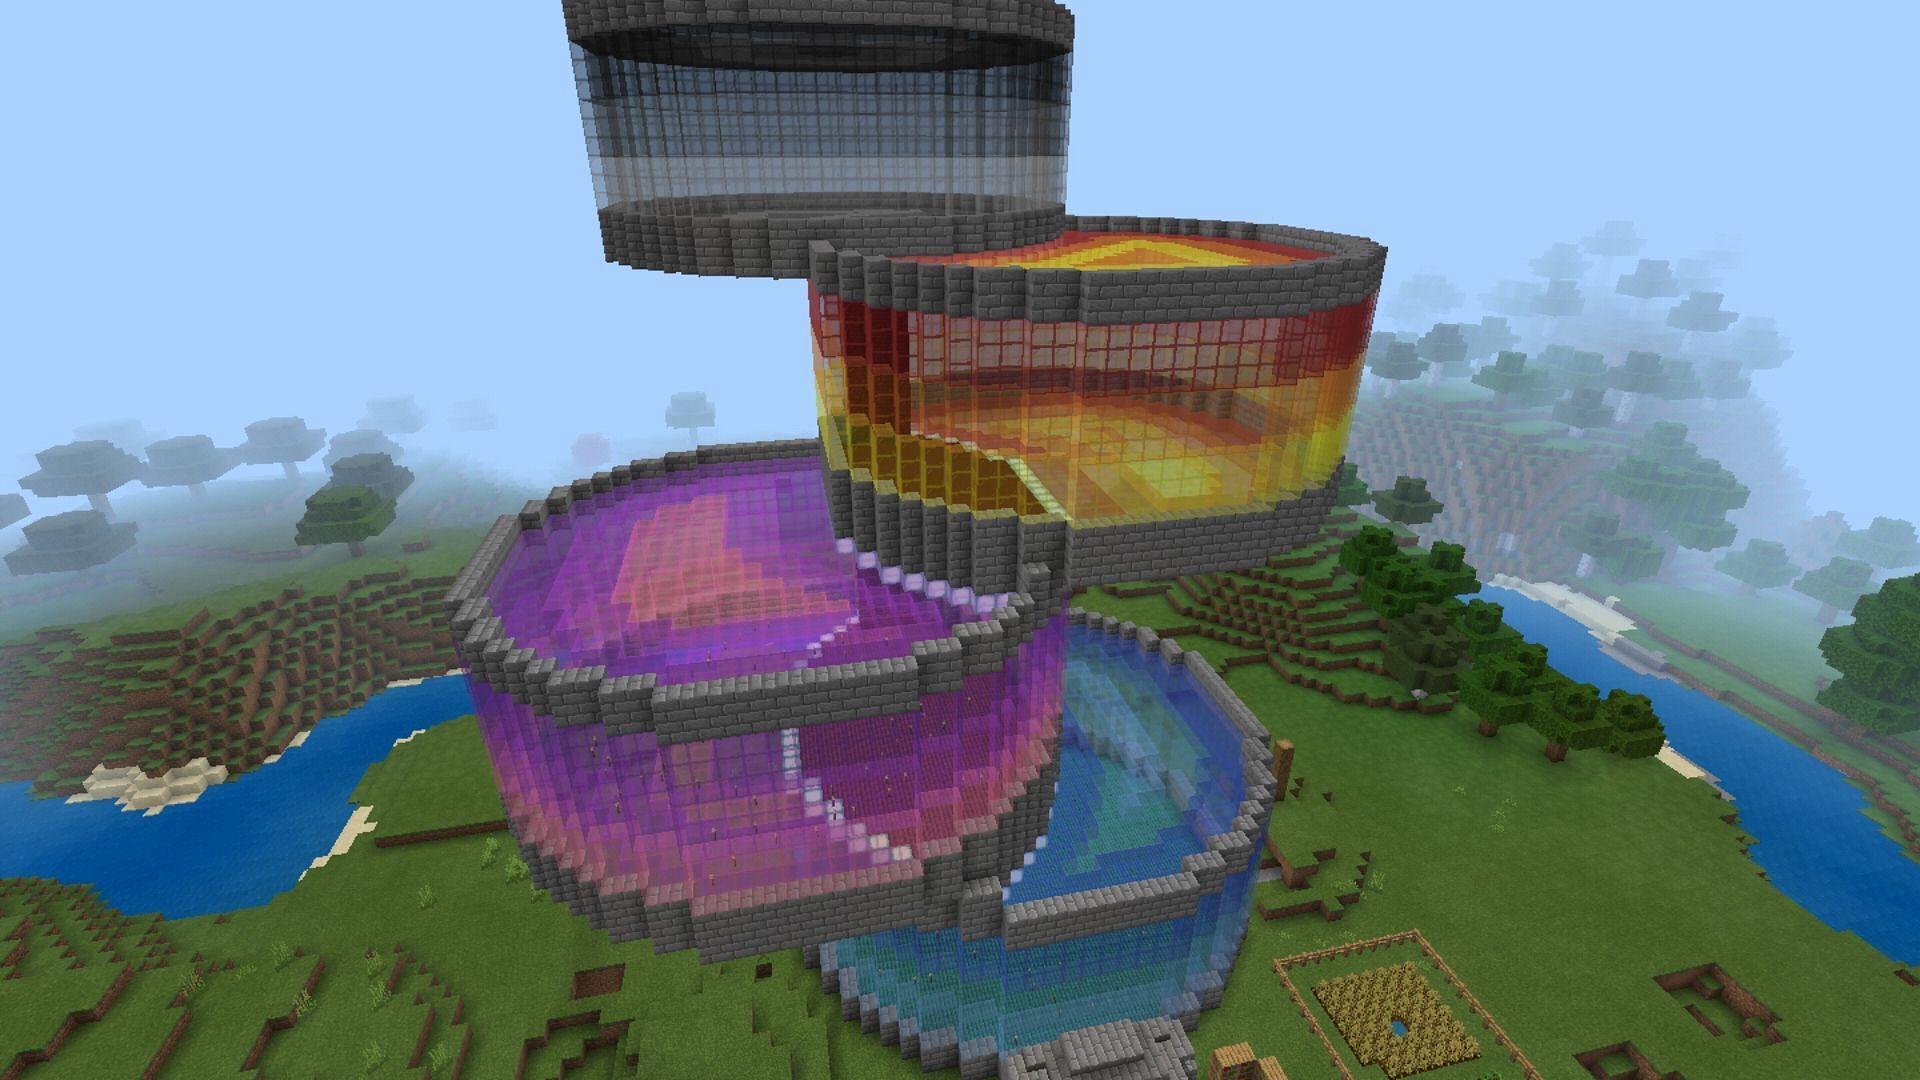 coolest thing ever built in minecraft